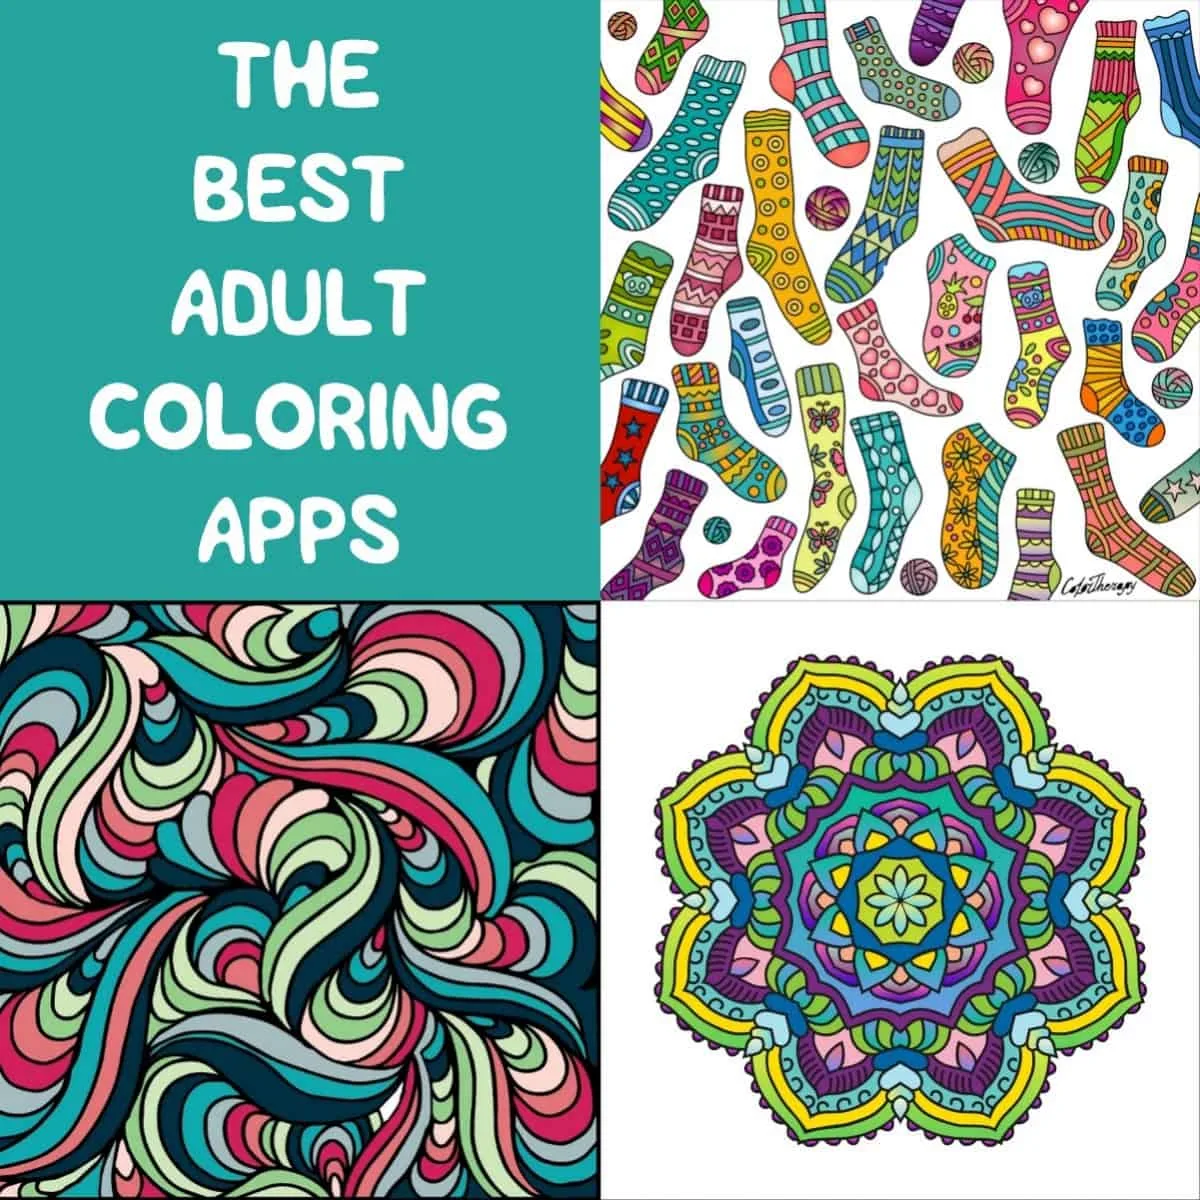 Adult Coloring Book: Sample All Kinds of Beautiful Images For Grown-ups to  Color (Beautiful Adult Coloring Books)